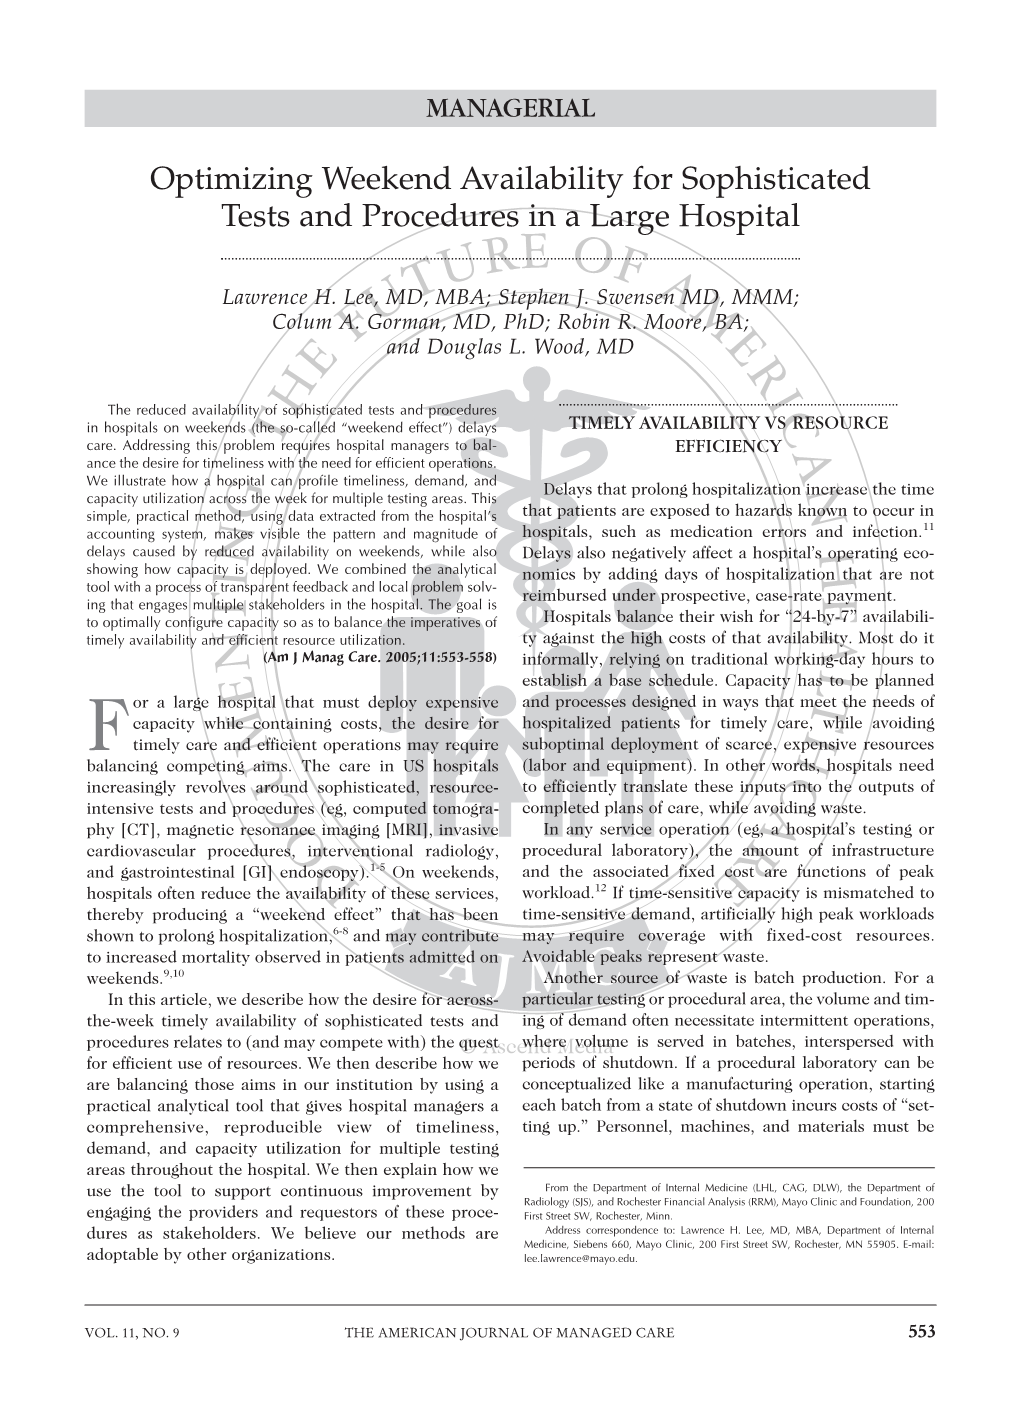 Optimizing Weekend Availability for Sophisticated Tests and Procedures in a Large Hospital